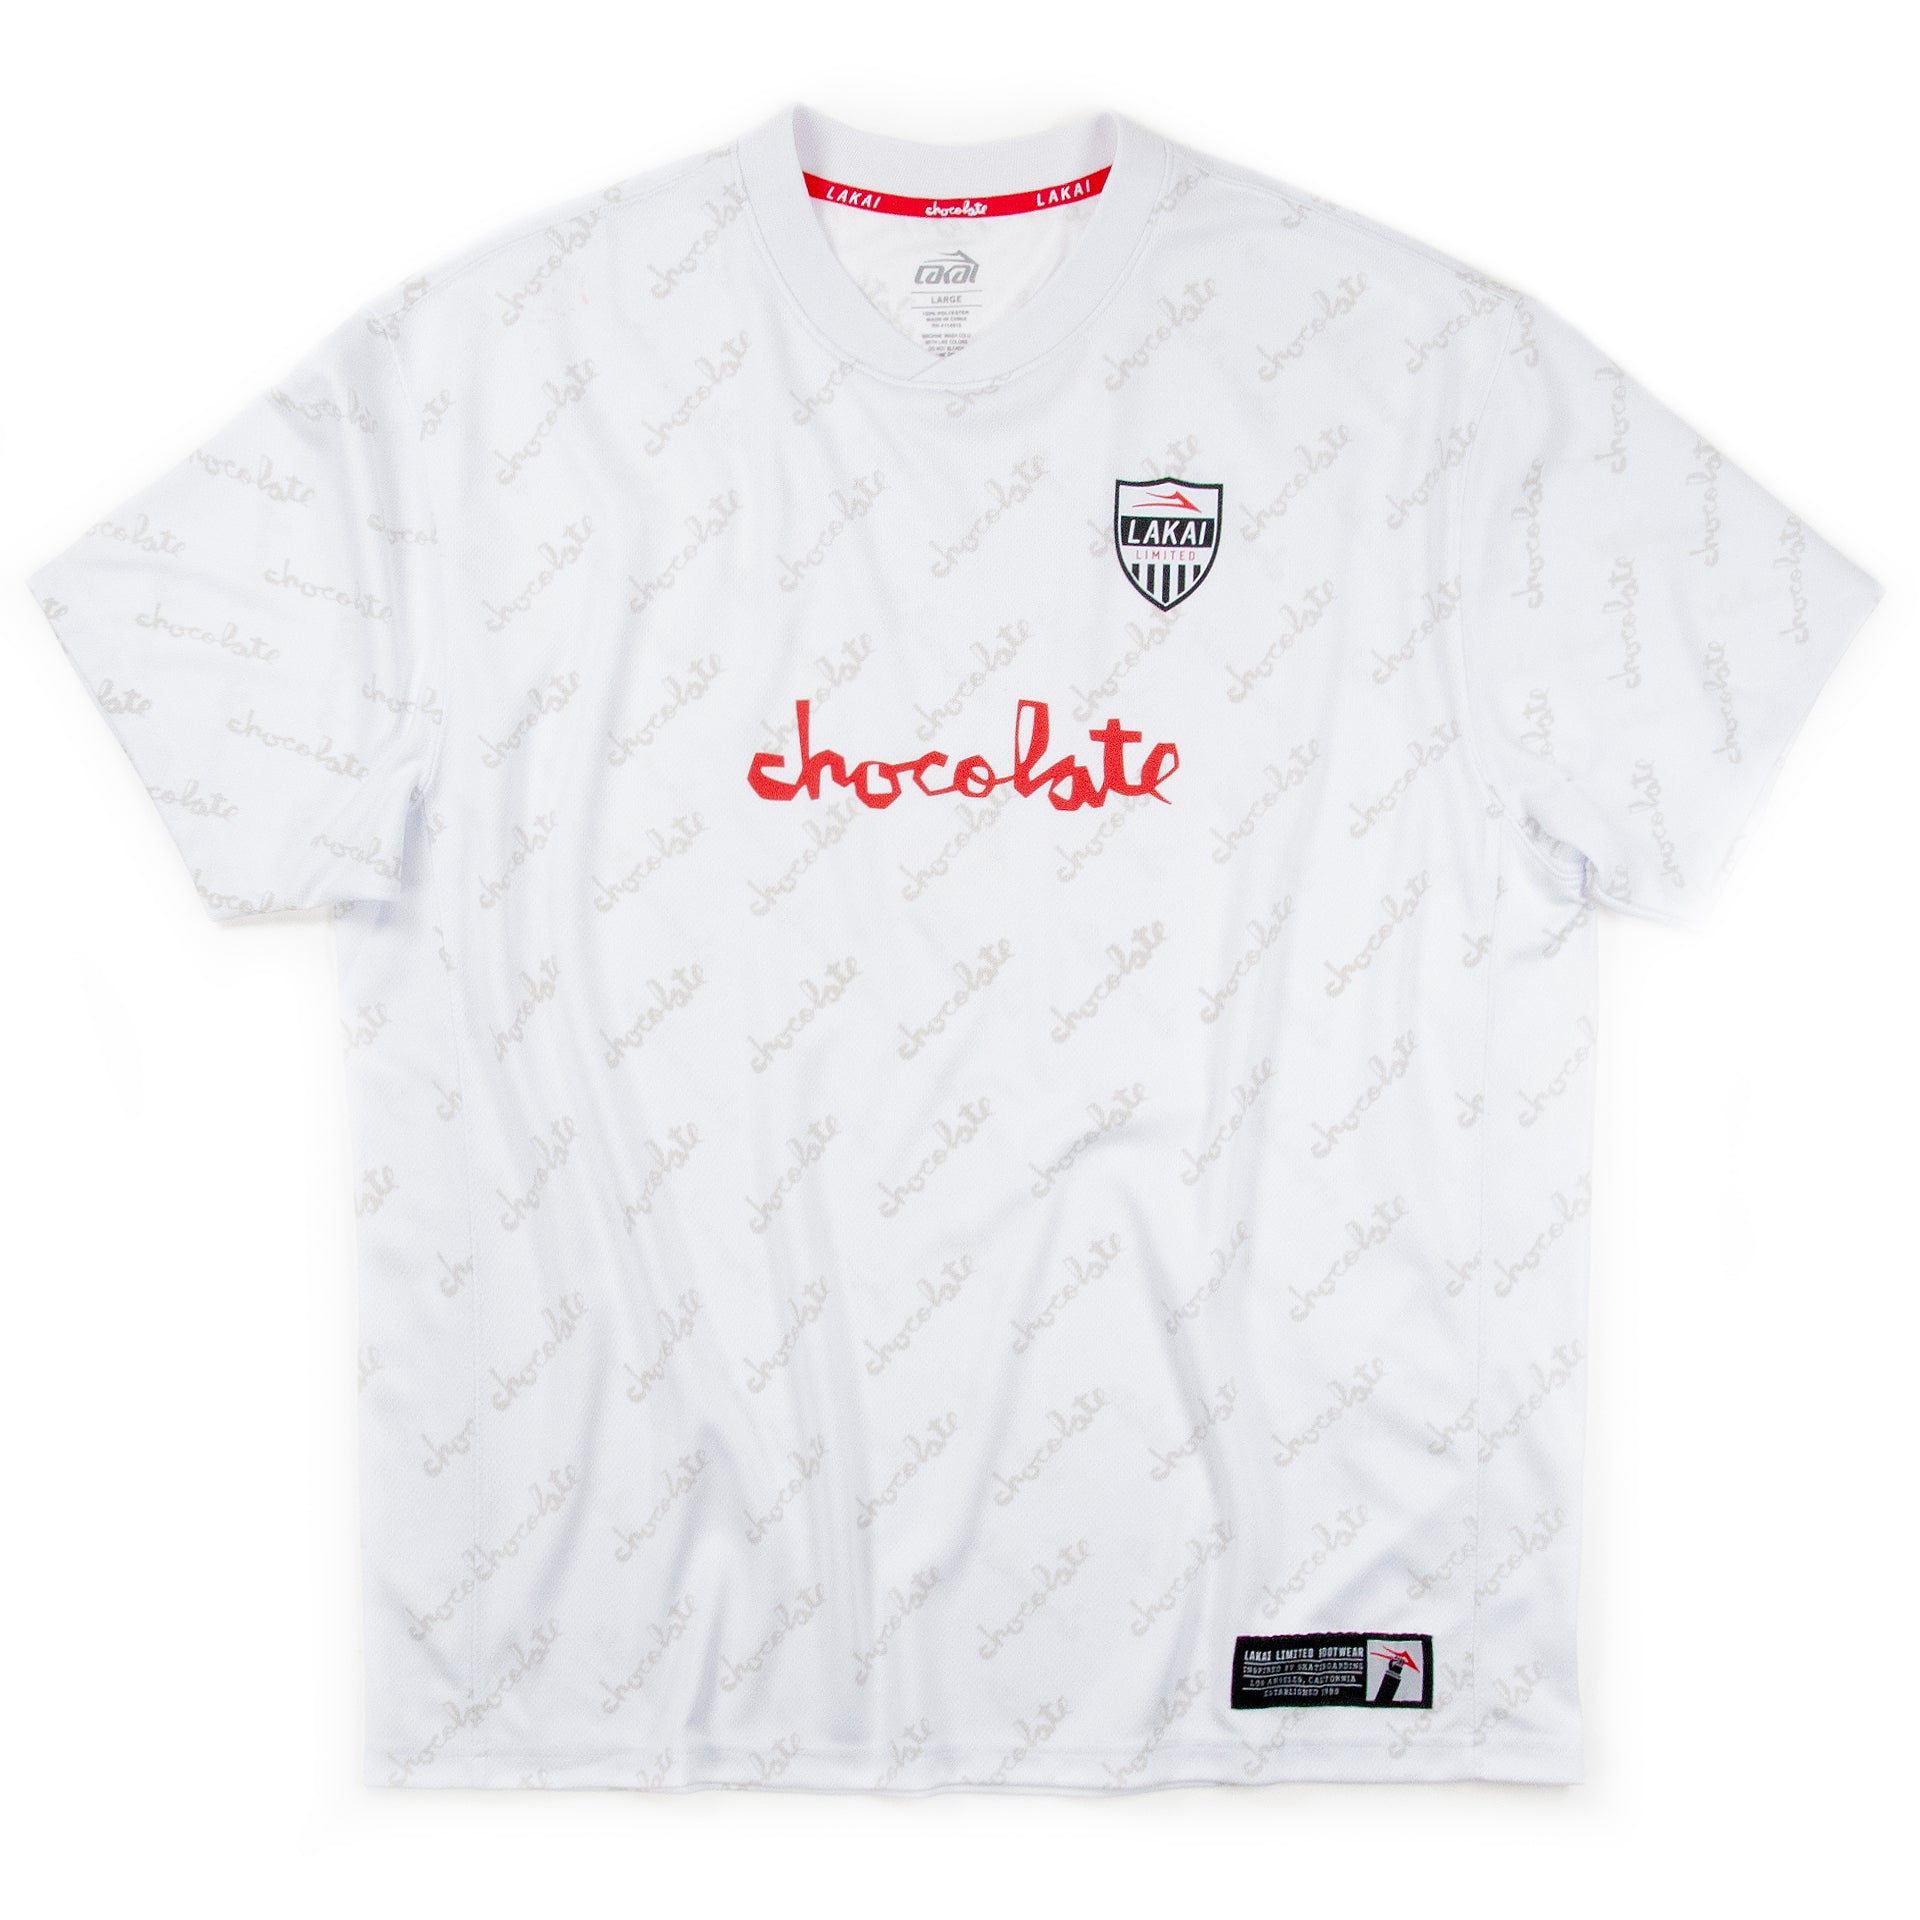 Lakai x Chocolate - Athletic Jersey T-Shirt - White - Prime Delux Store